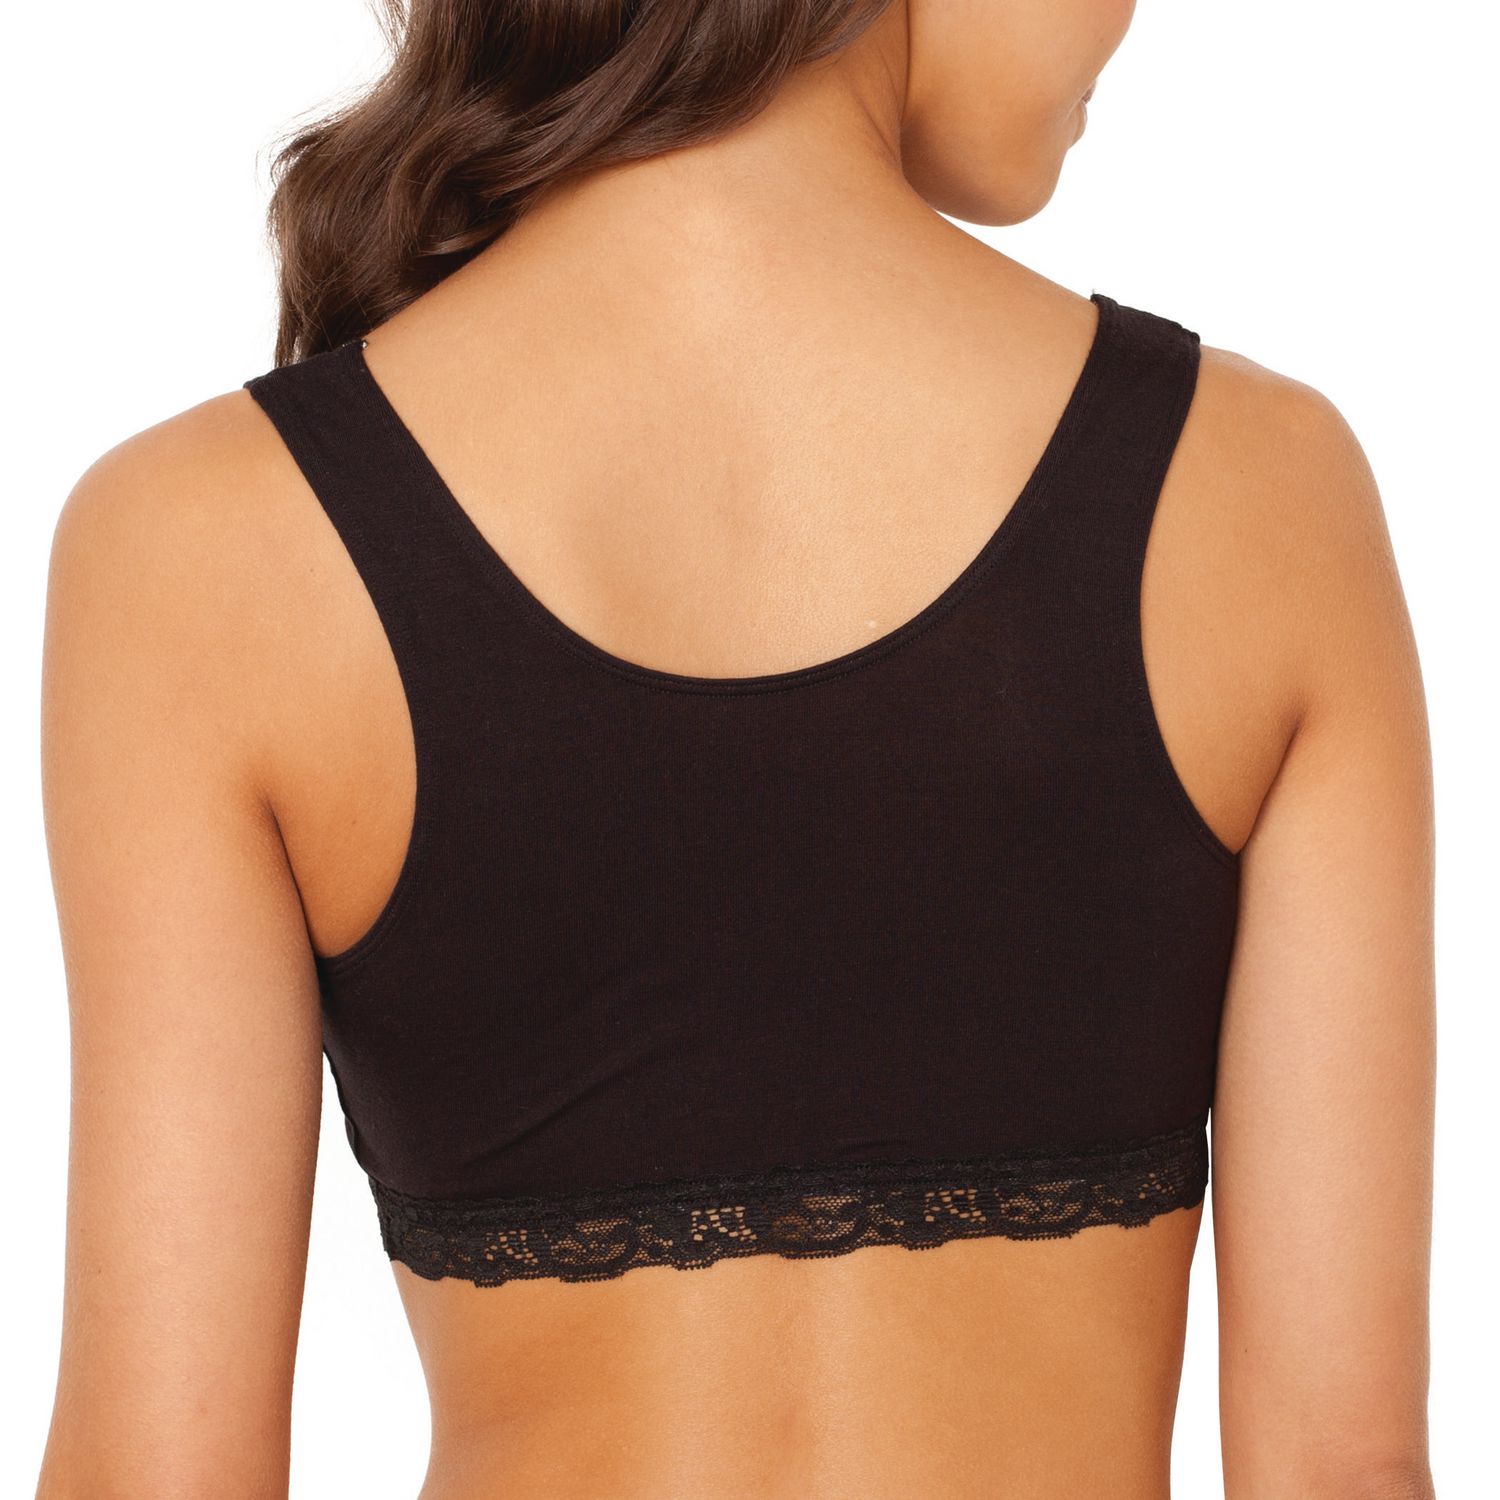 Fruit of the Loom Women's Lace Trimmed Super Soft Sleep Bra